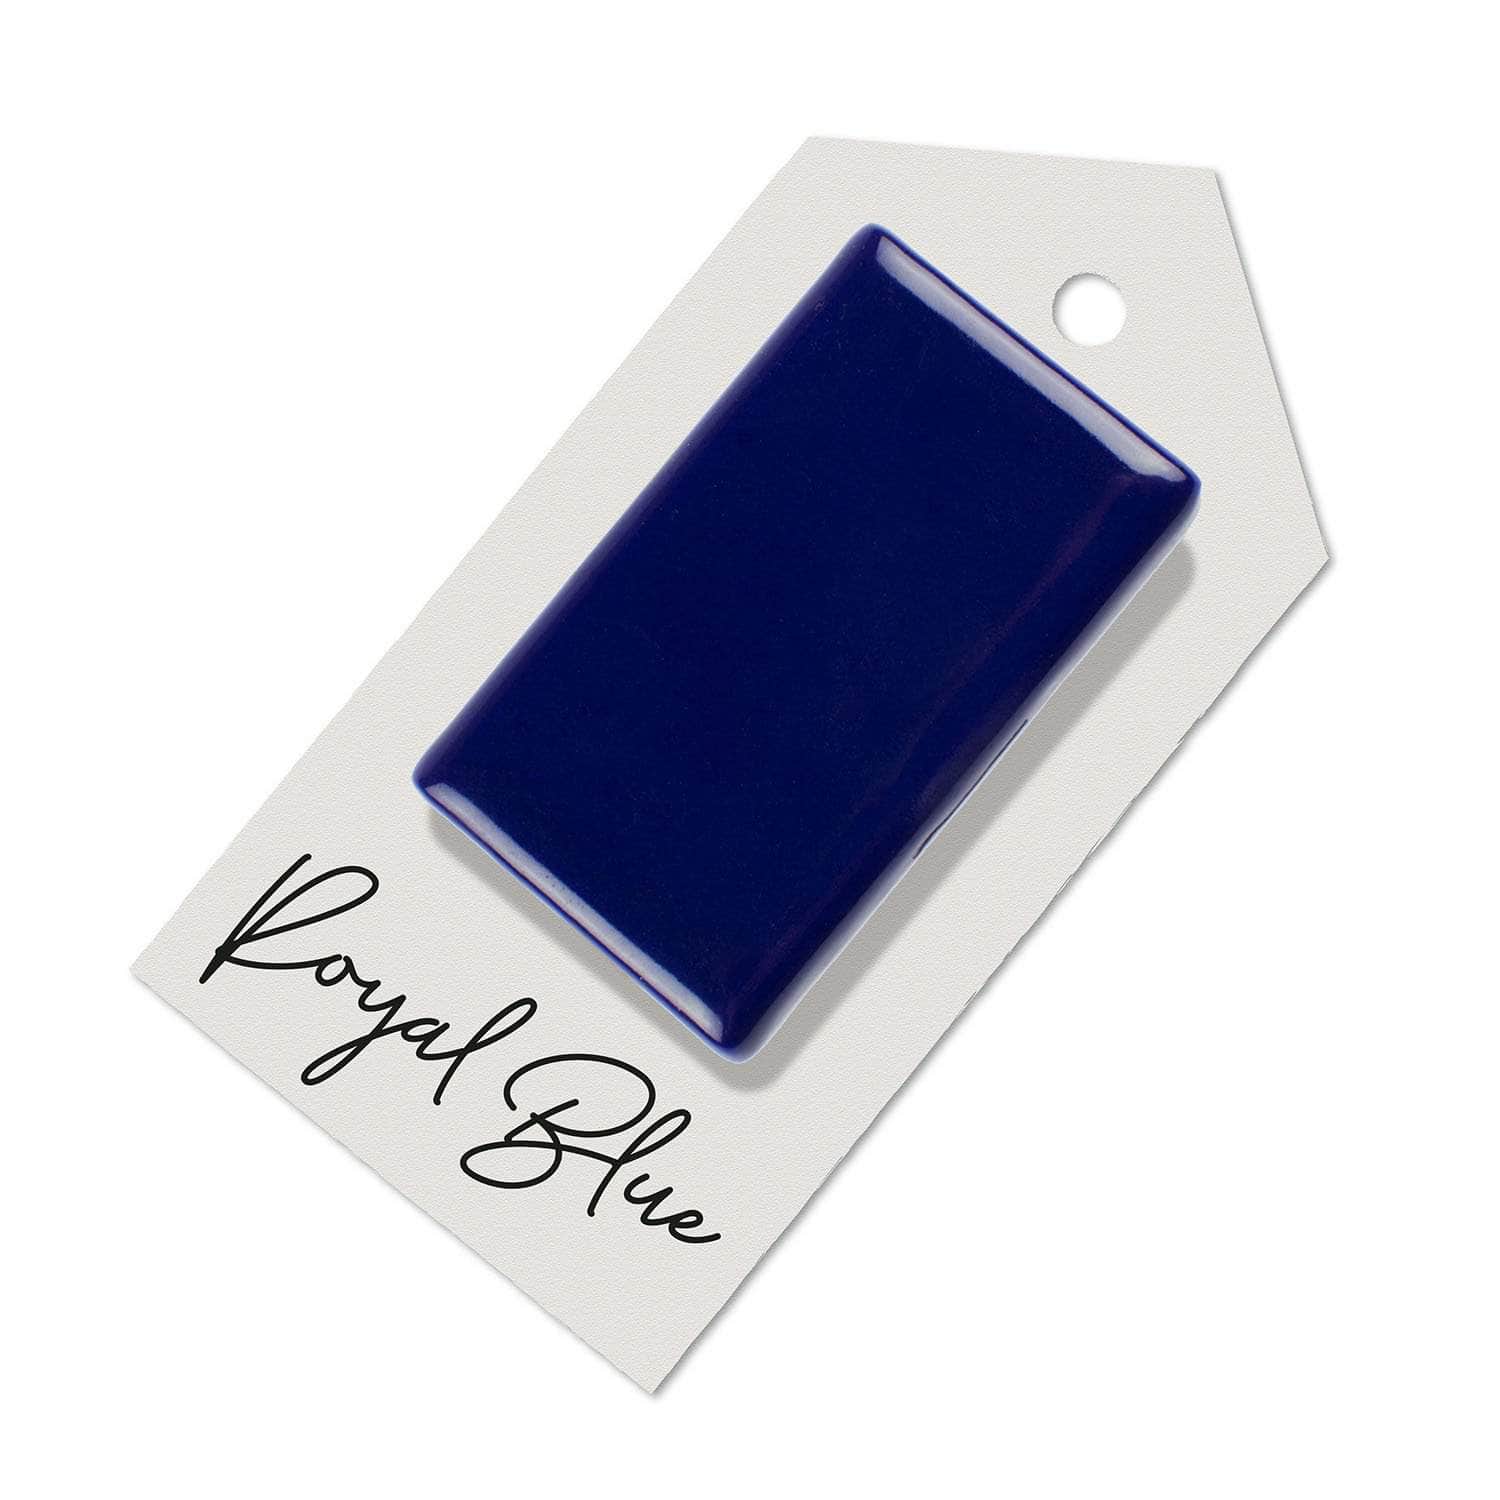 Royal Blue sample for Aga range cooker re-enamelling & reconditioned cookers